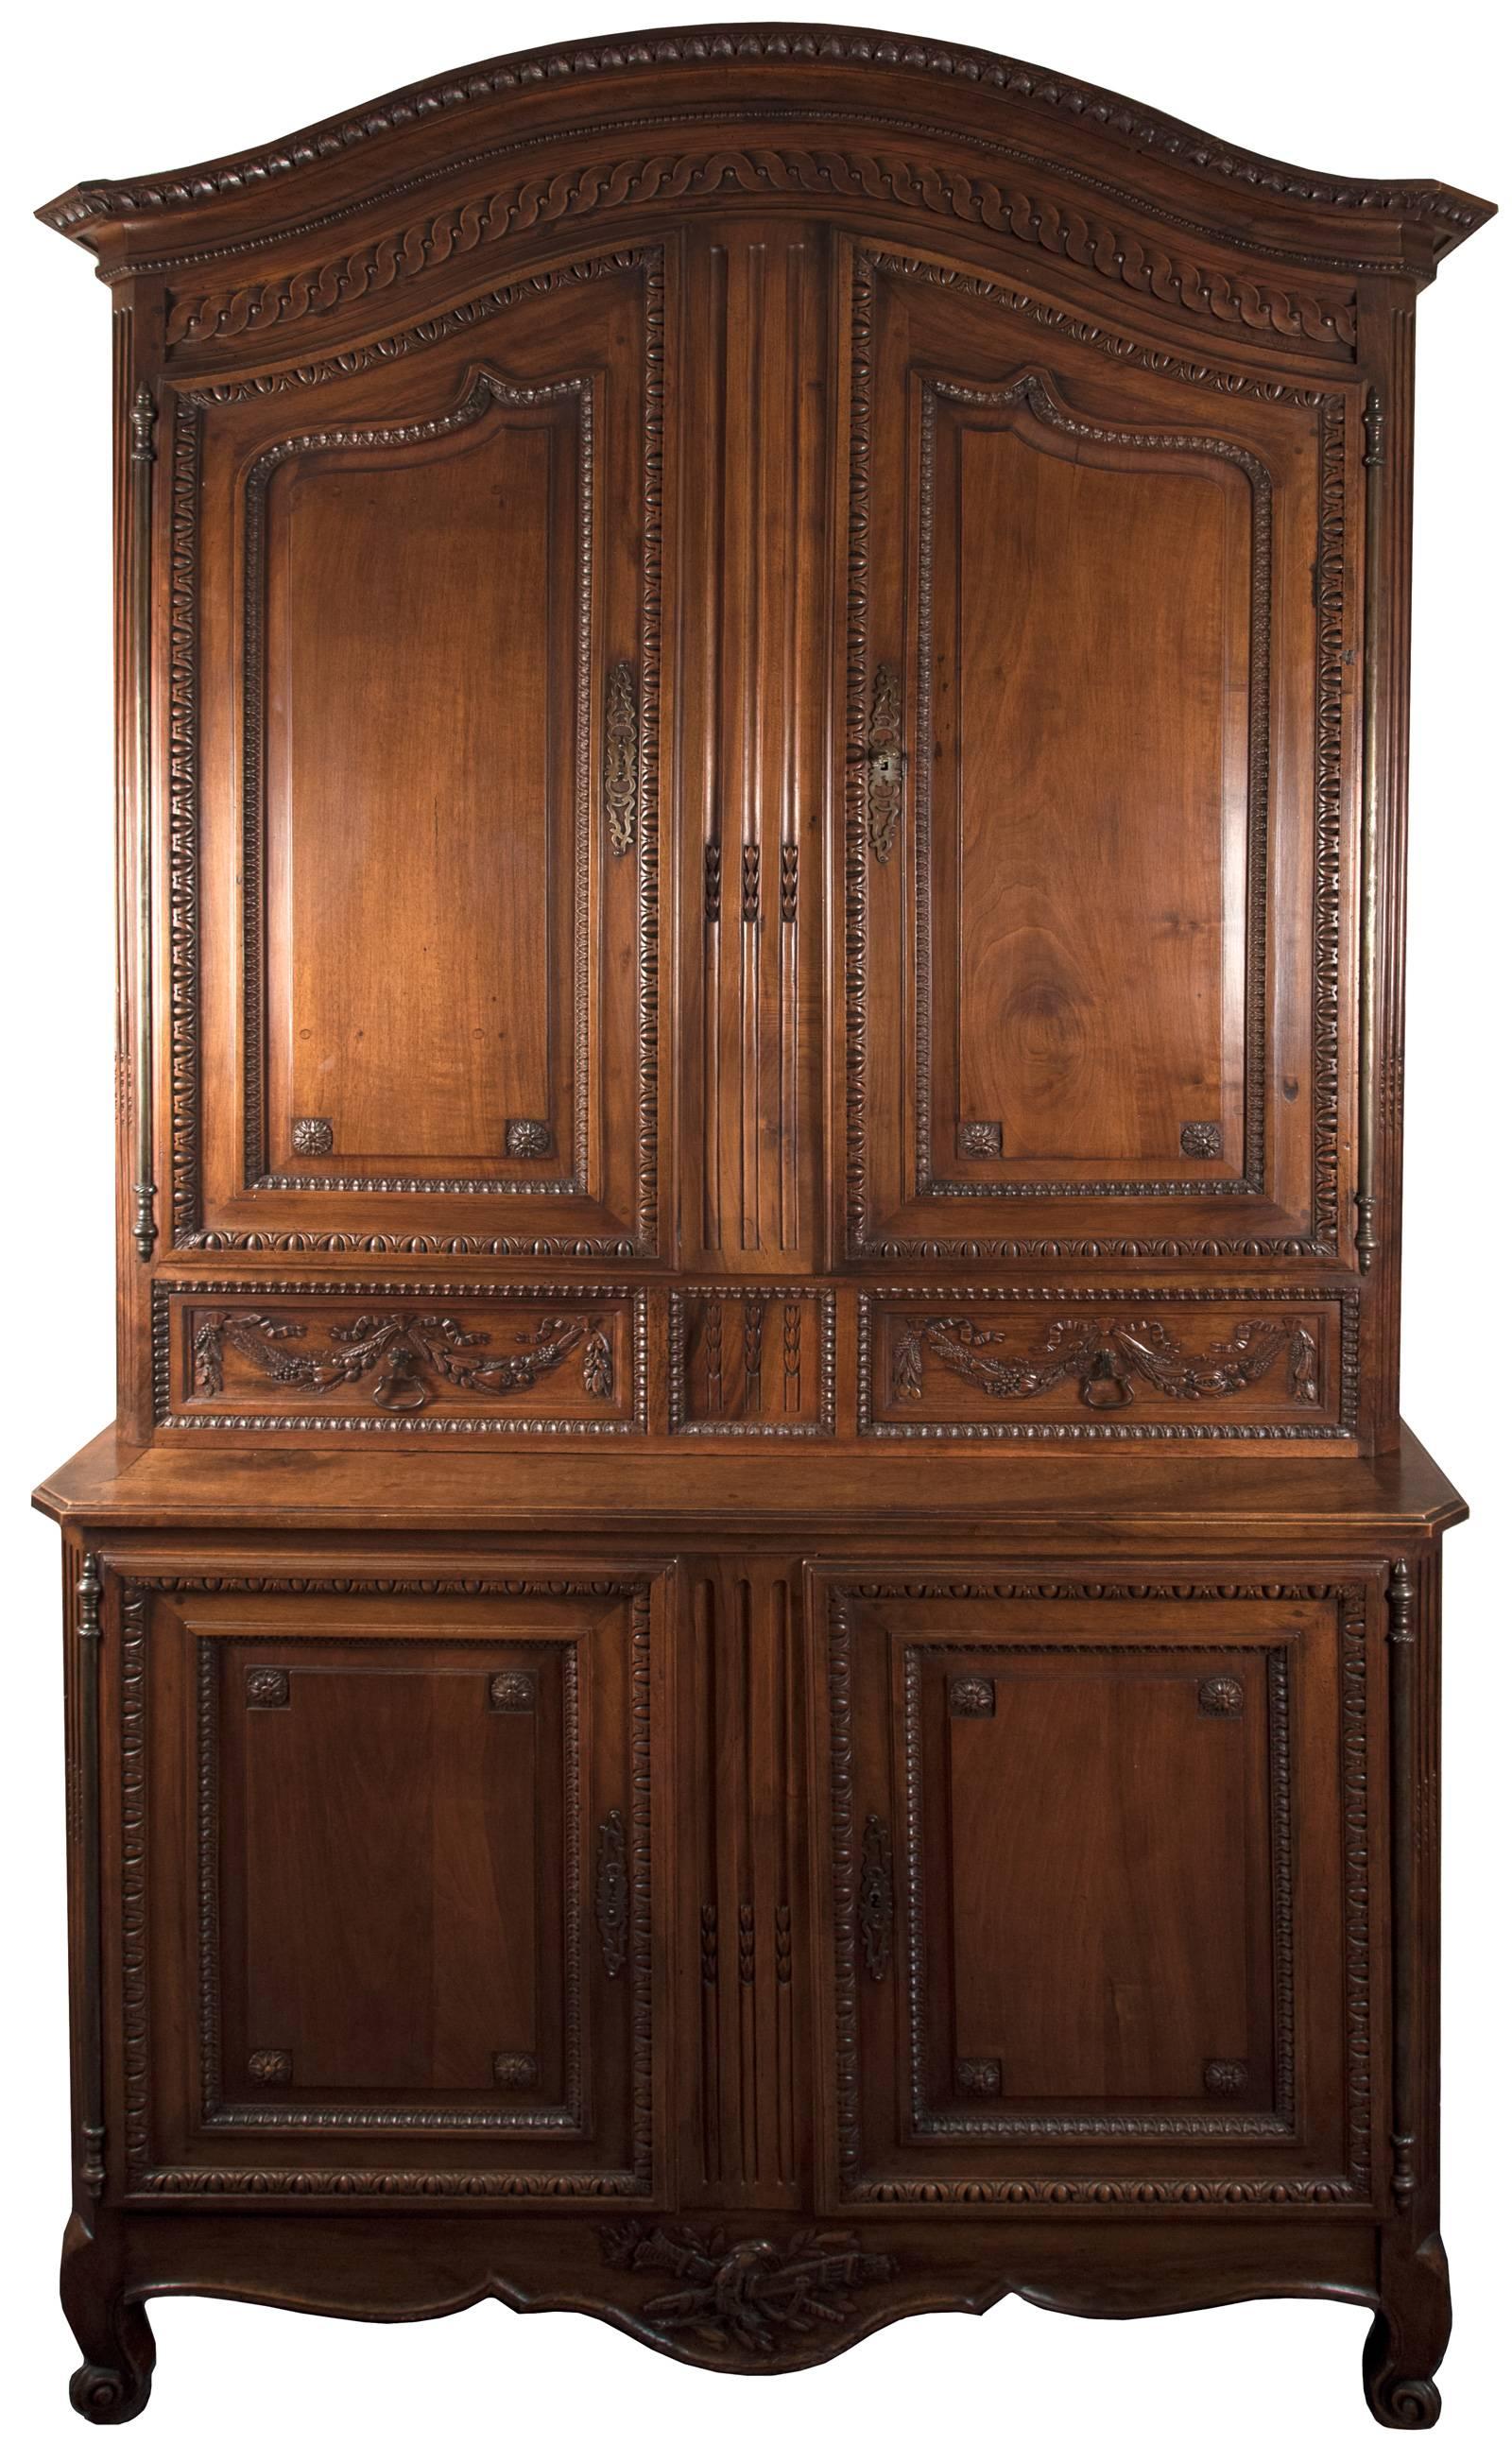 A magnificent 18th century armoire with an 'en chapeau', or curved central pediment with a deep steeped out molding, which sits above a frieze carved with beaded and guilloche pattern. The centre dormant panels of both the upper and lower case is